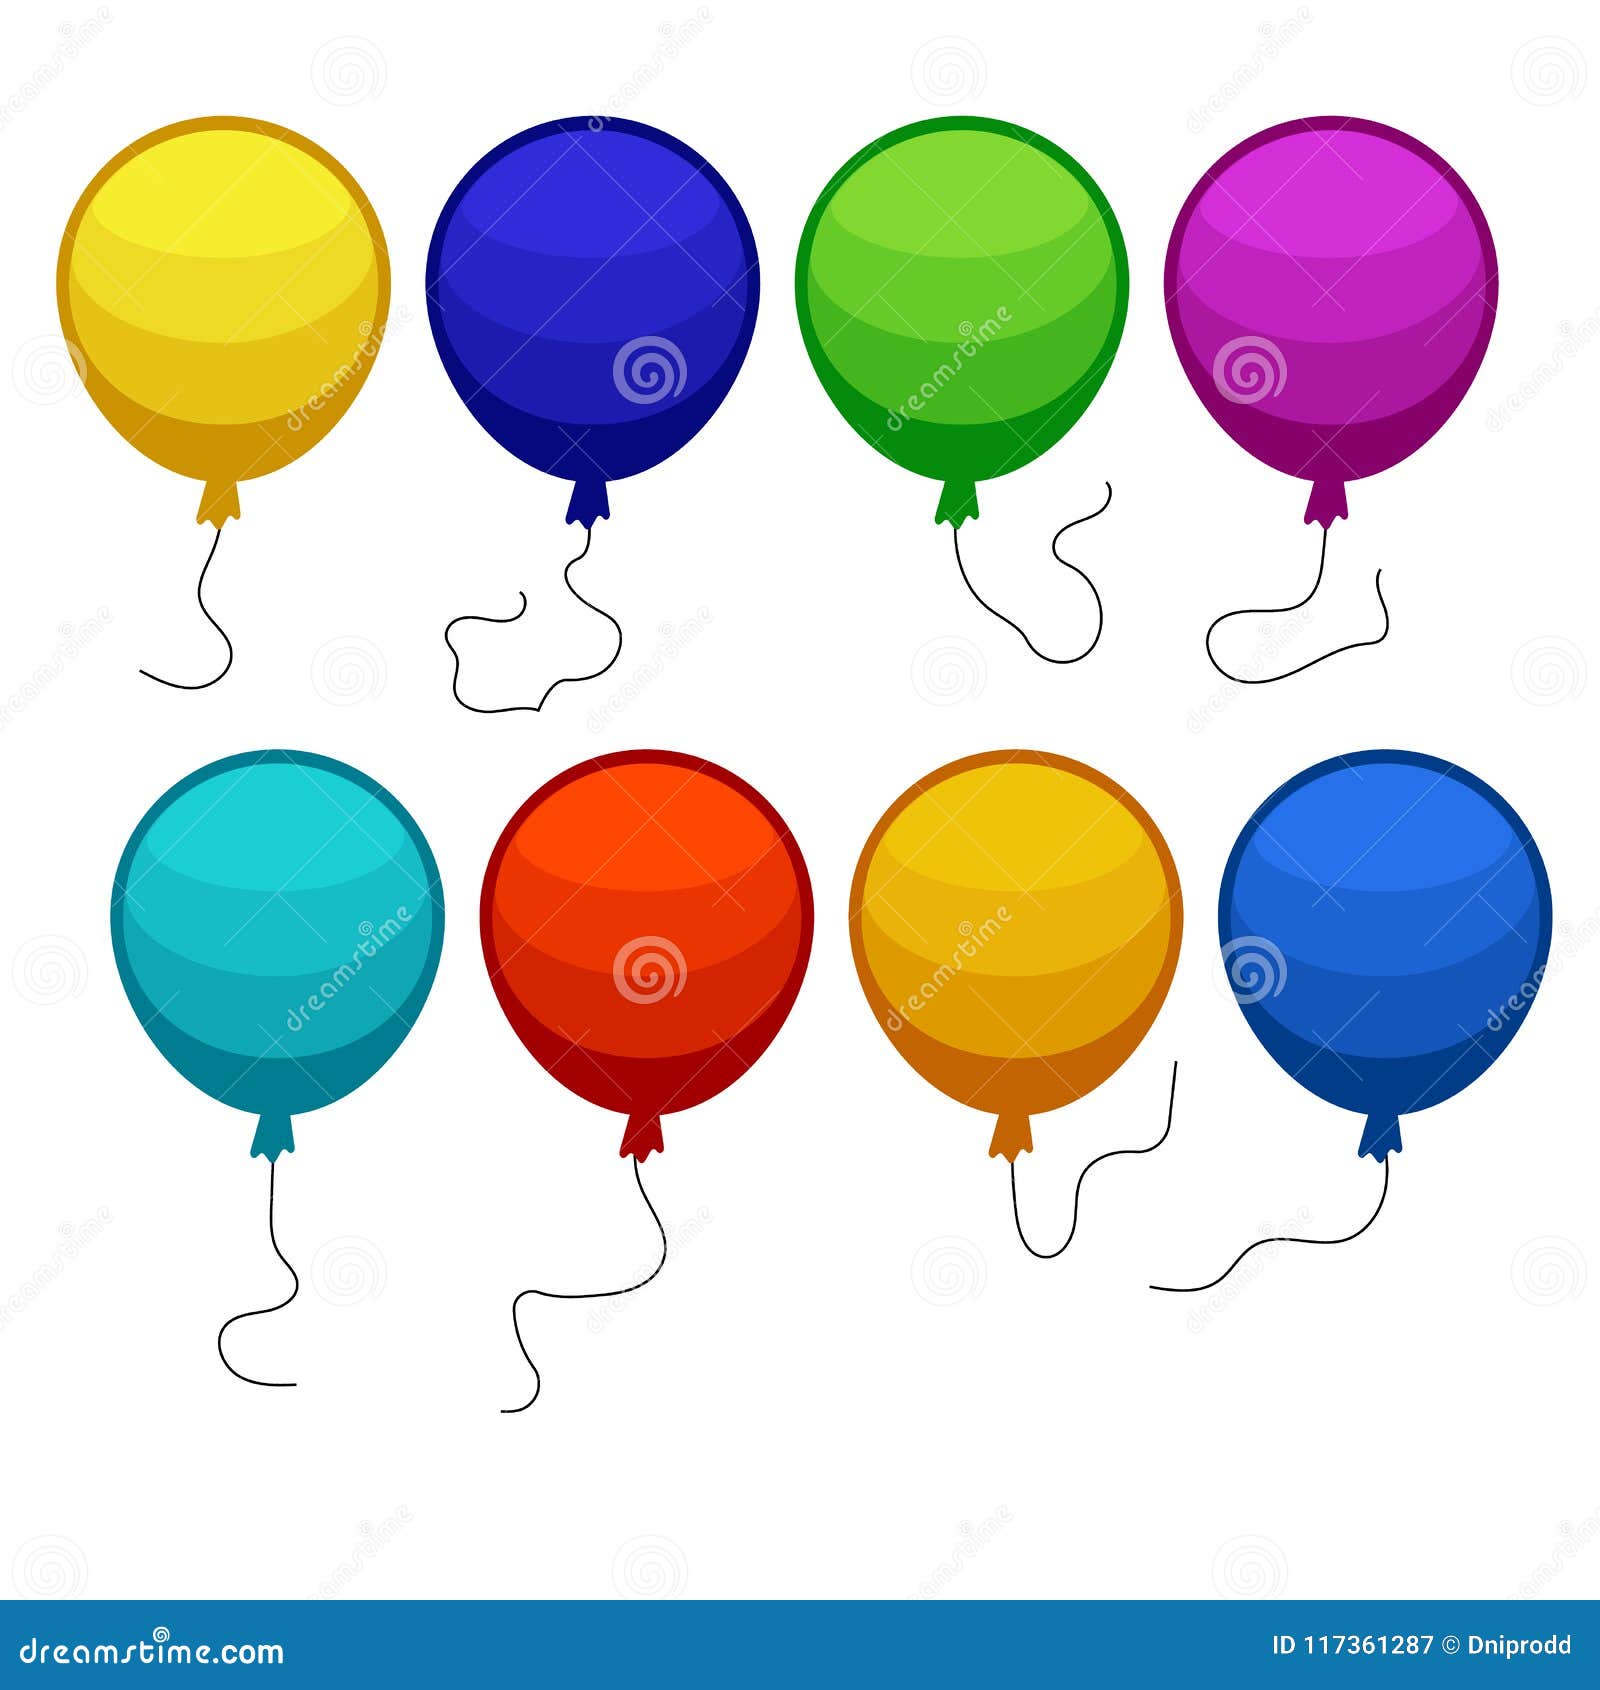 https://thumbs.dreamstime.com/z/set-eight-colorful-balloons-string-isolated-white-background-vector-illustration-117361287.jpg